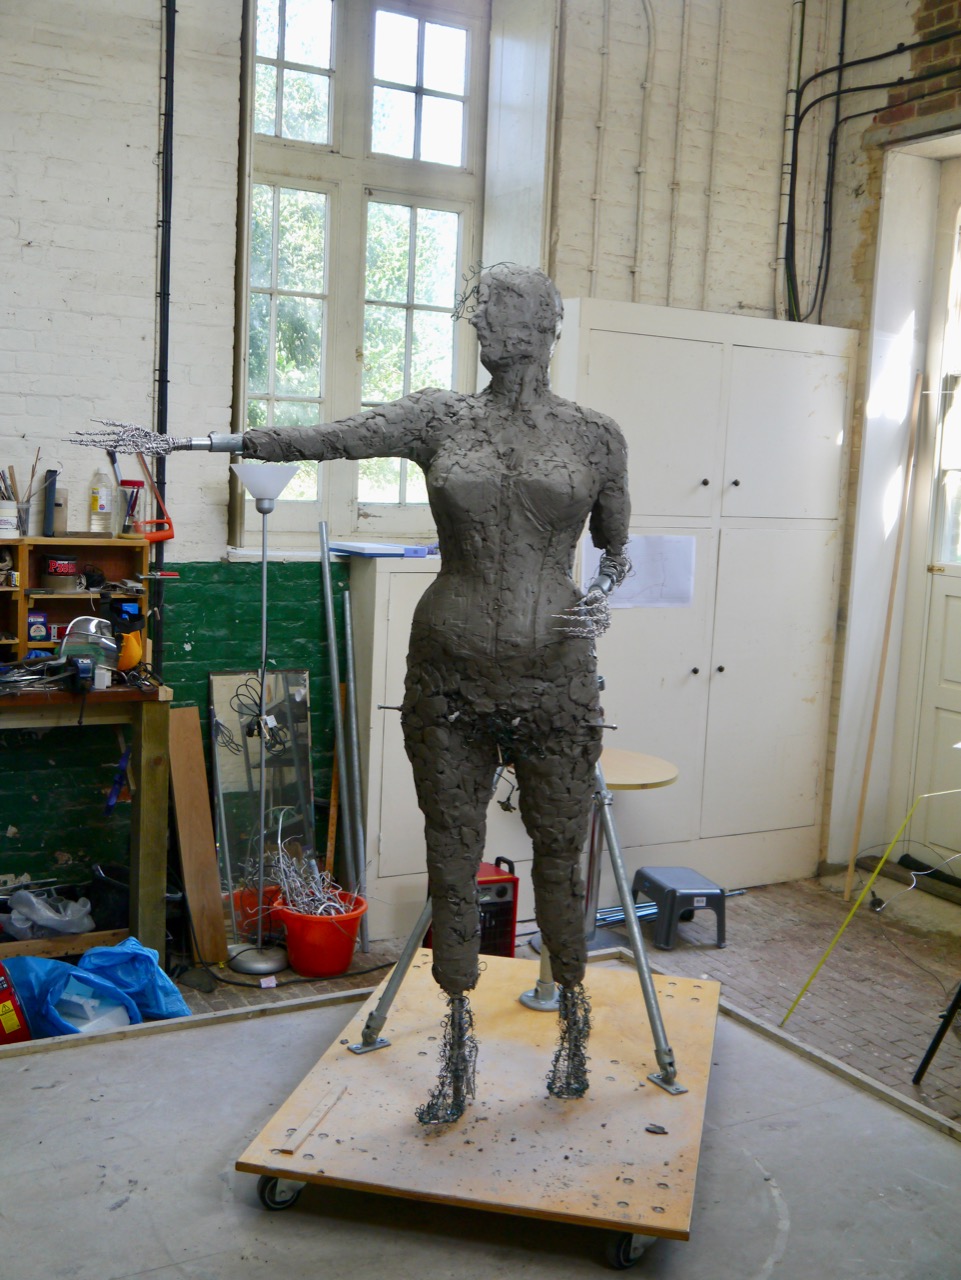 Emmeline unclothed in clay - by Hazel Reeves